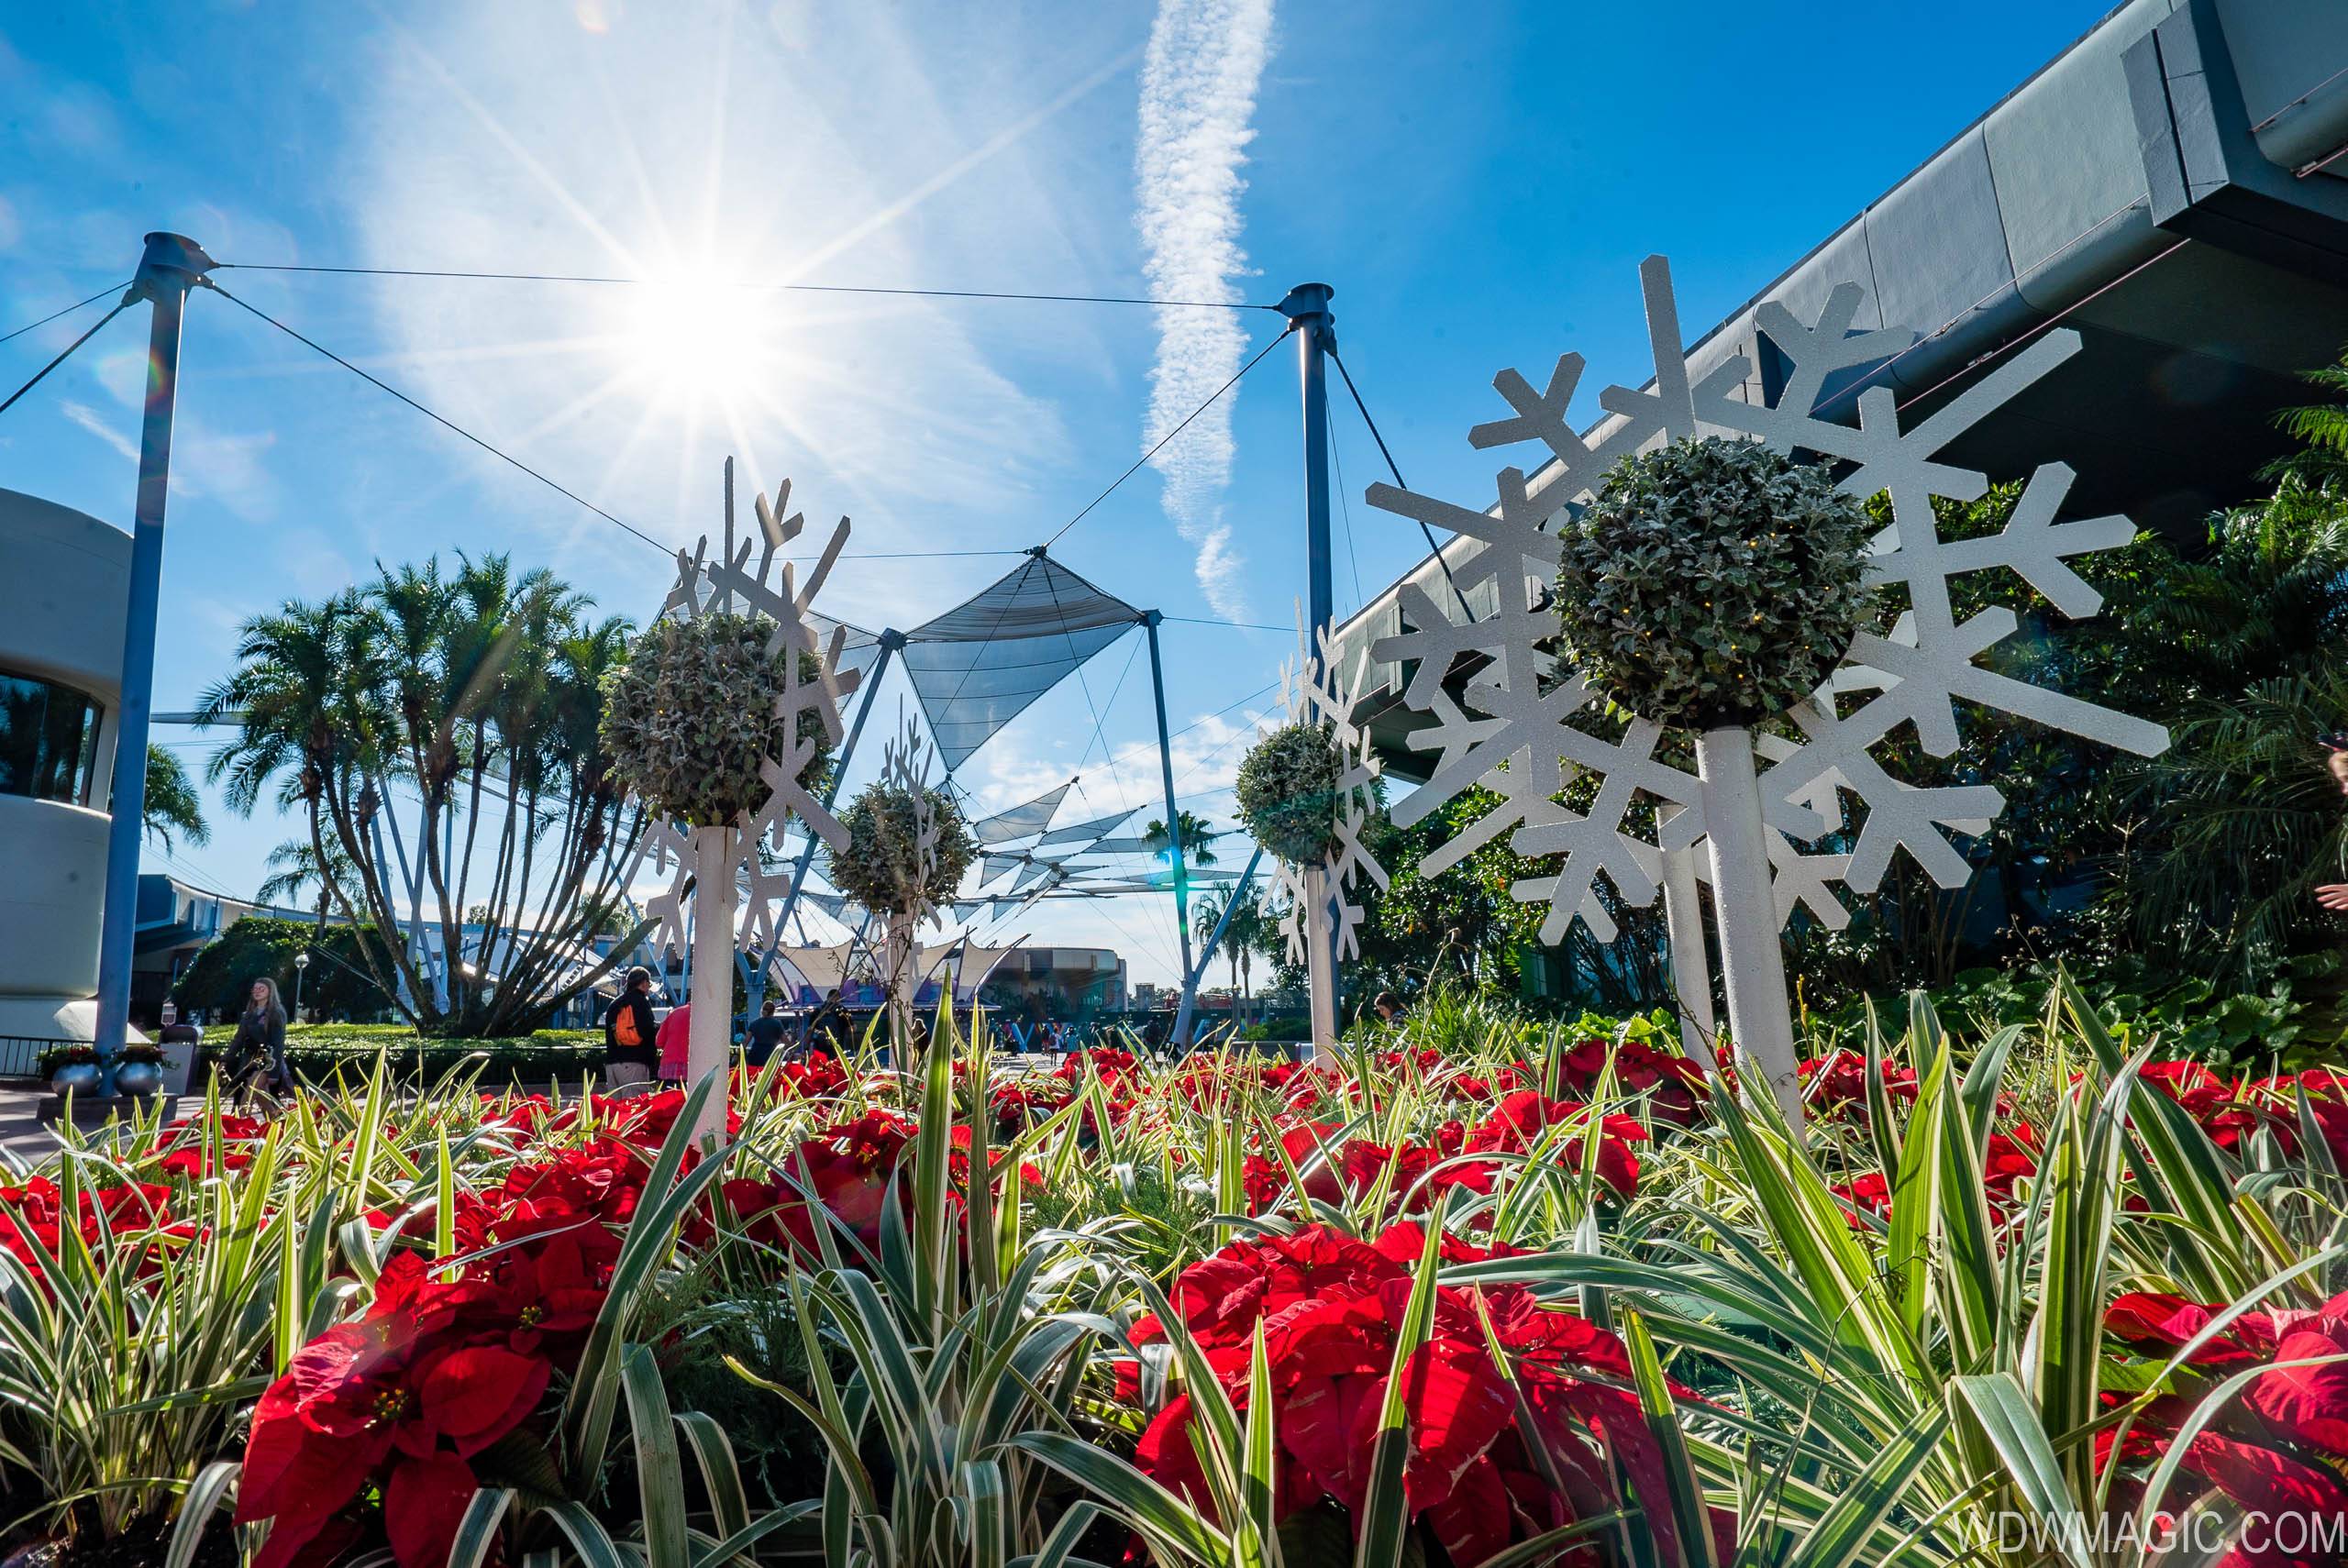 PHOTOS - A look at the changes to Epcot's Future World holiday decor as major construction continues